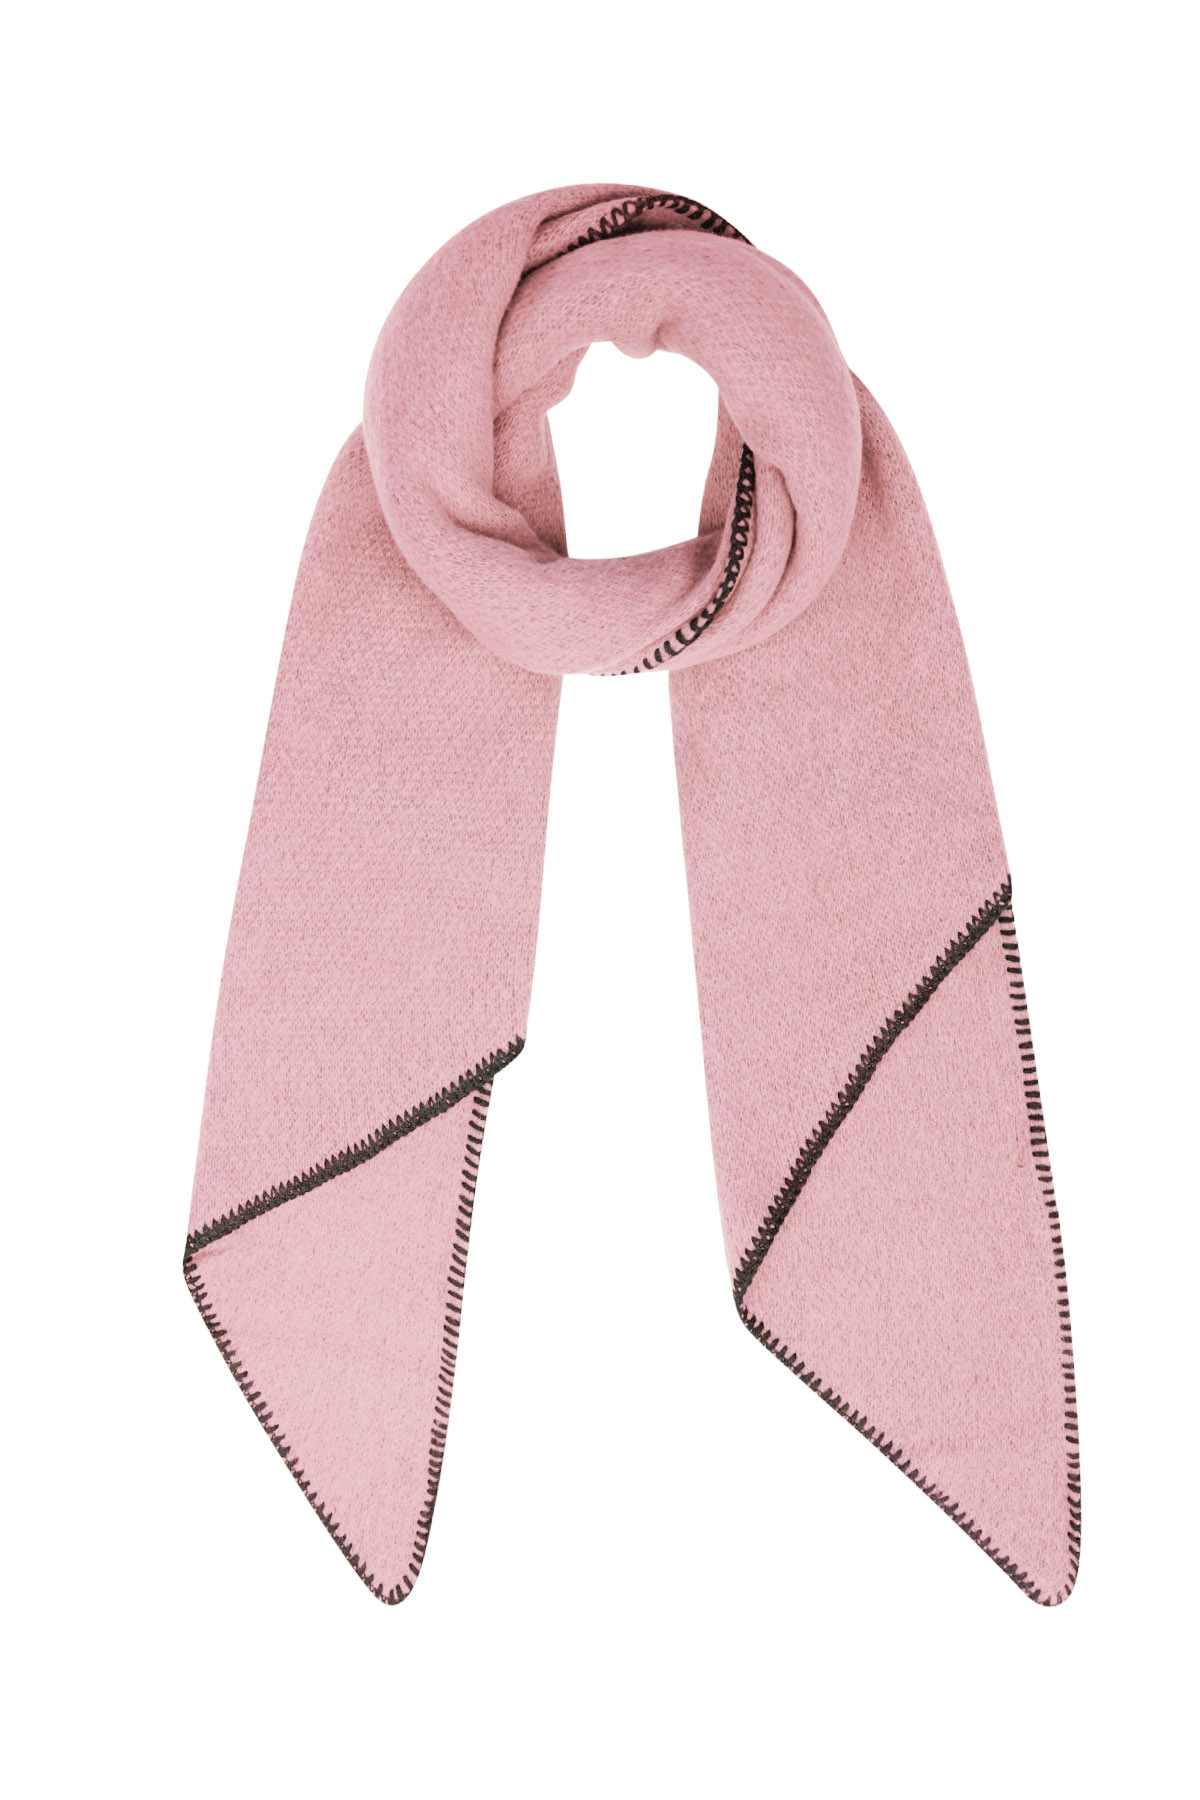 Winter scarf unicolor with black stitching - pink